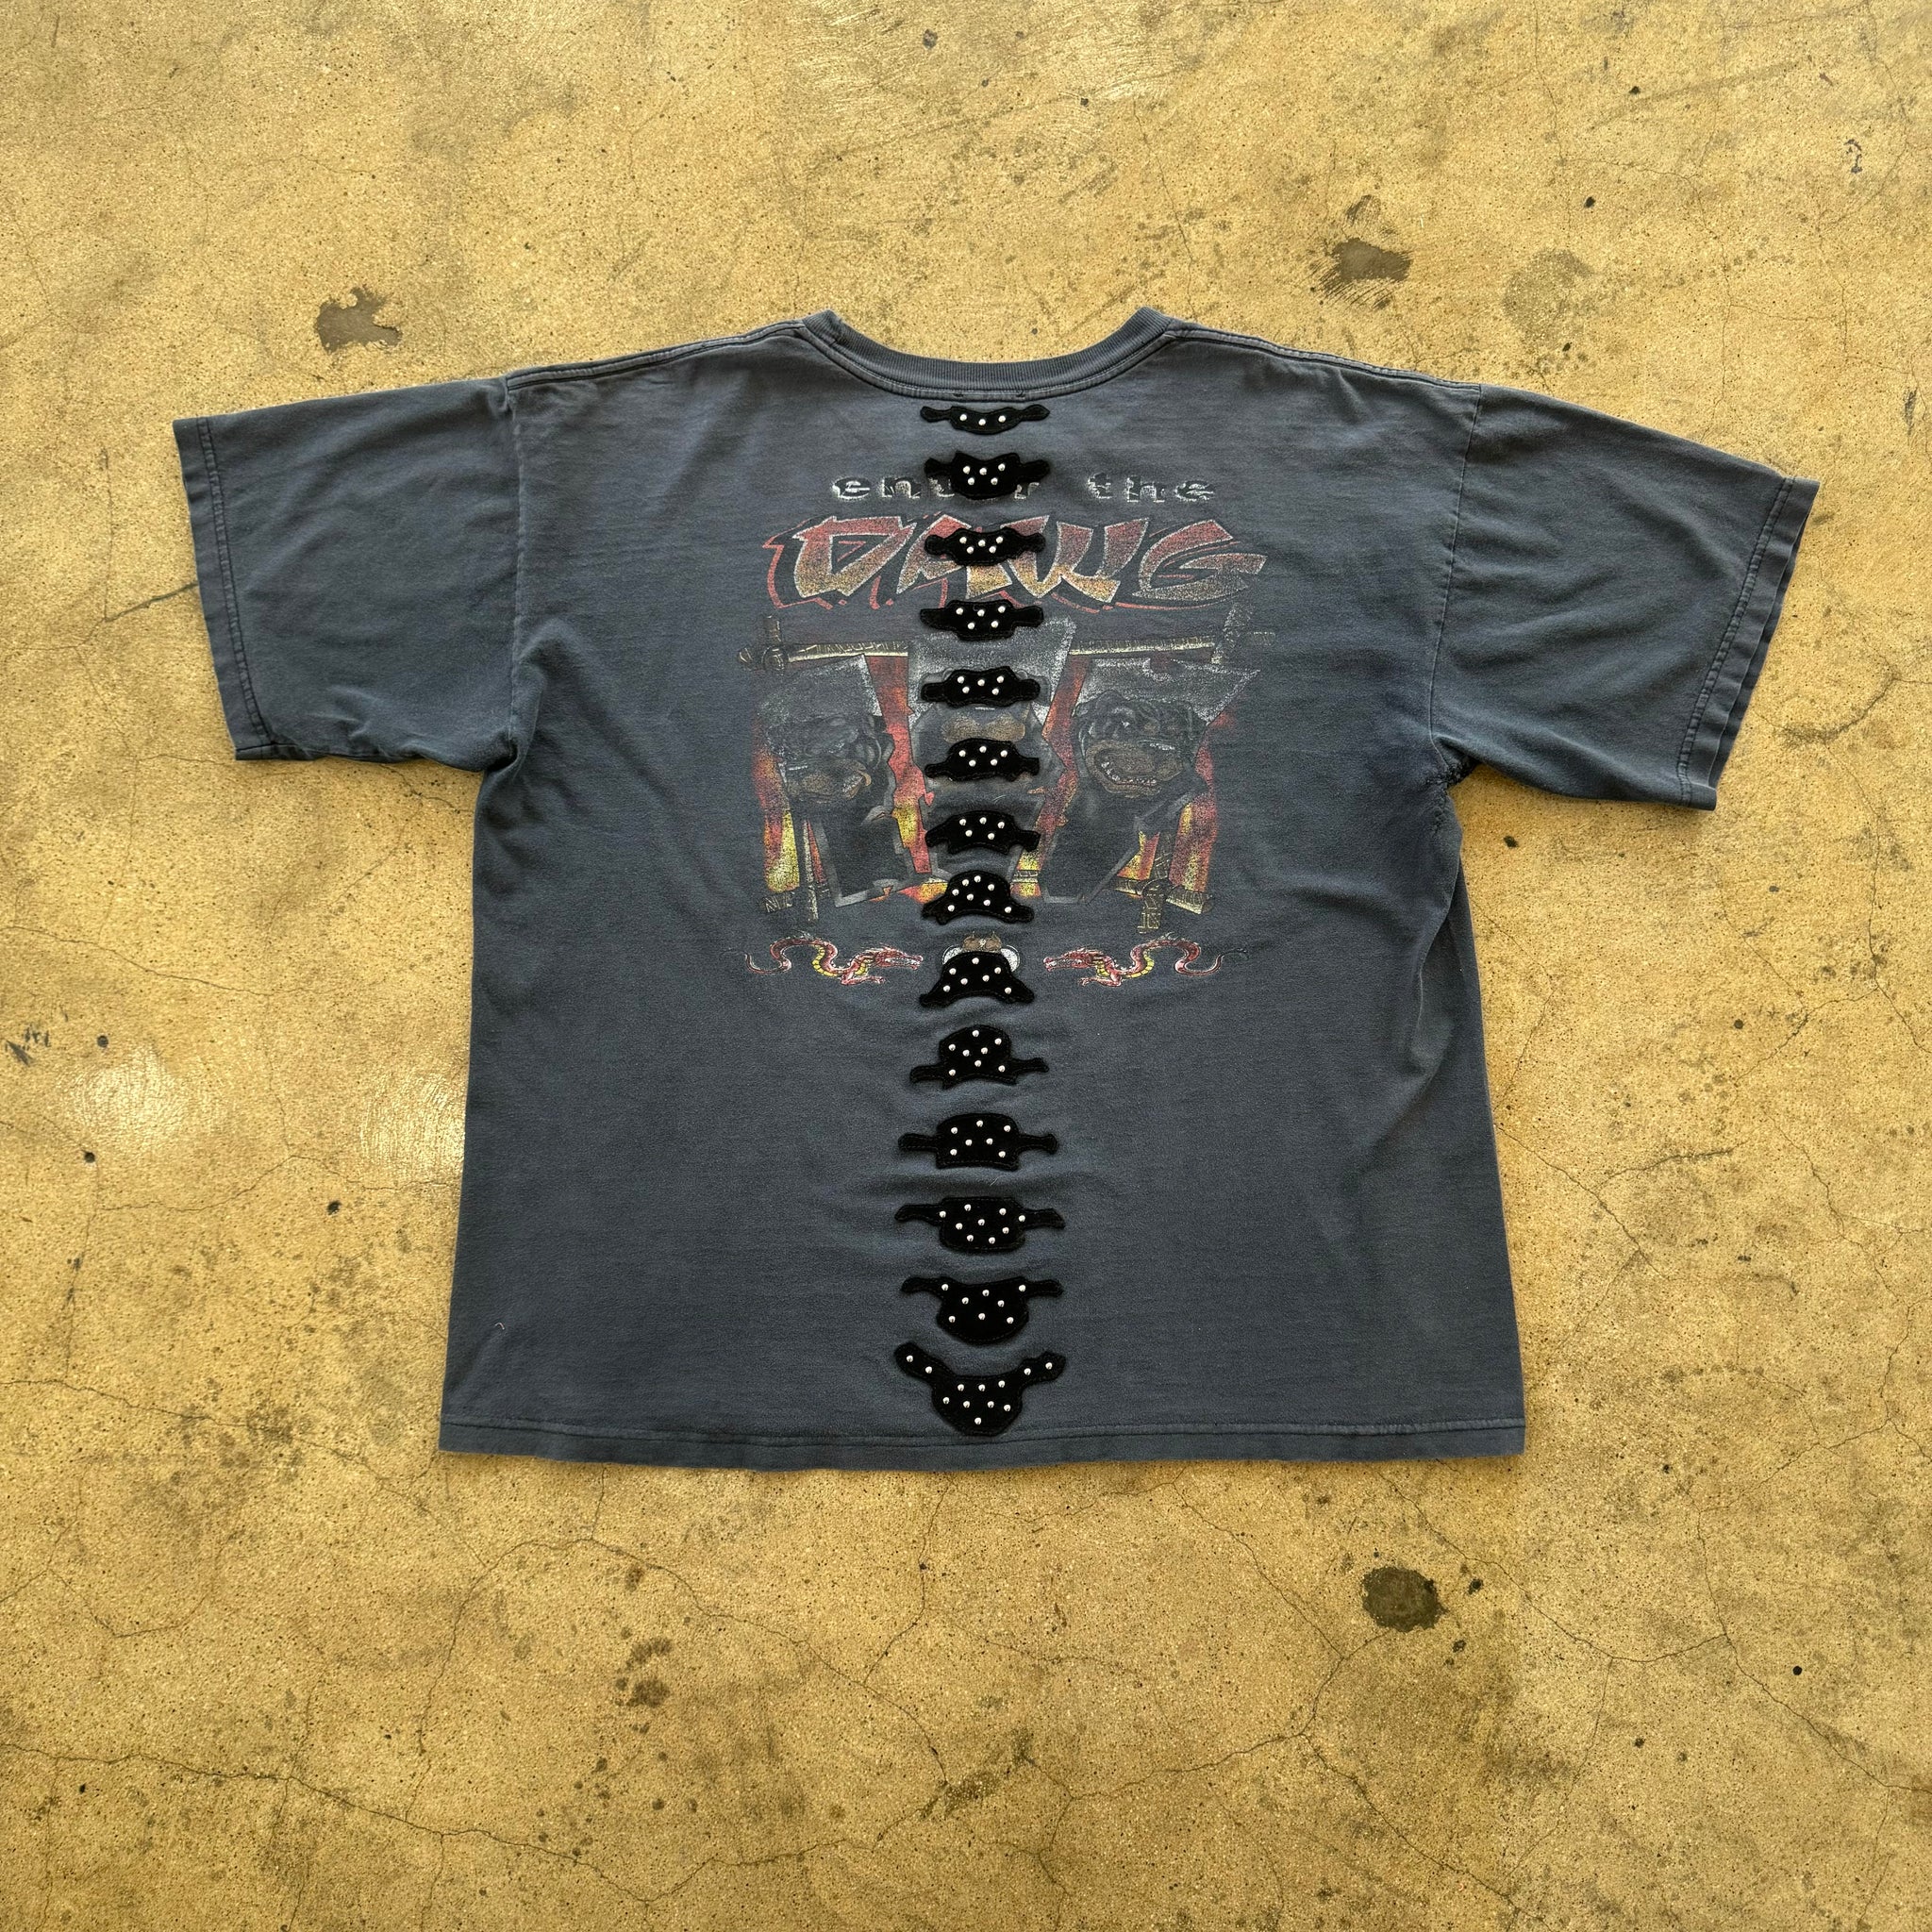 DaDawg 'Enter the Dawg' Studded Leather Appliqué T-shirt